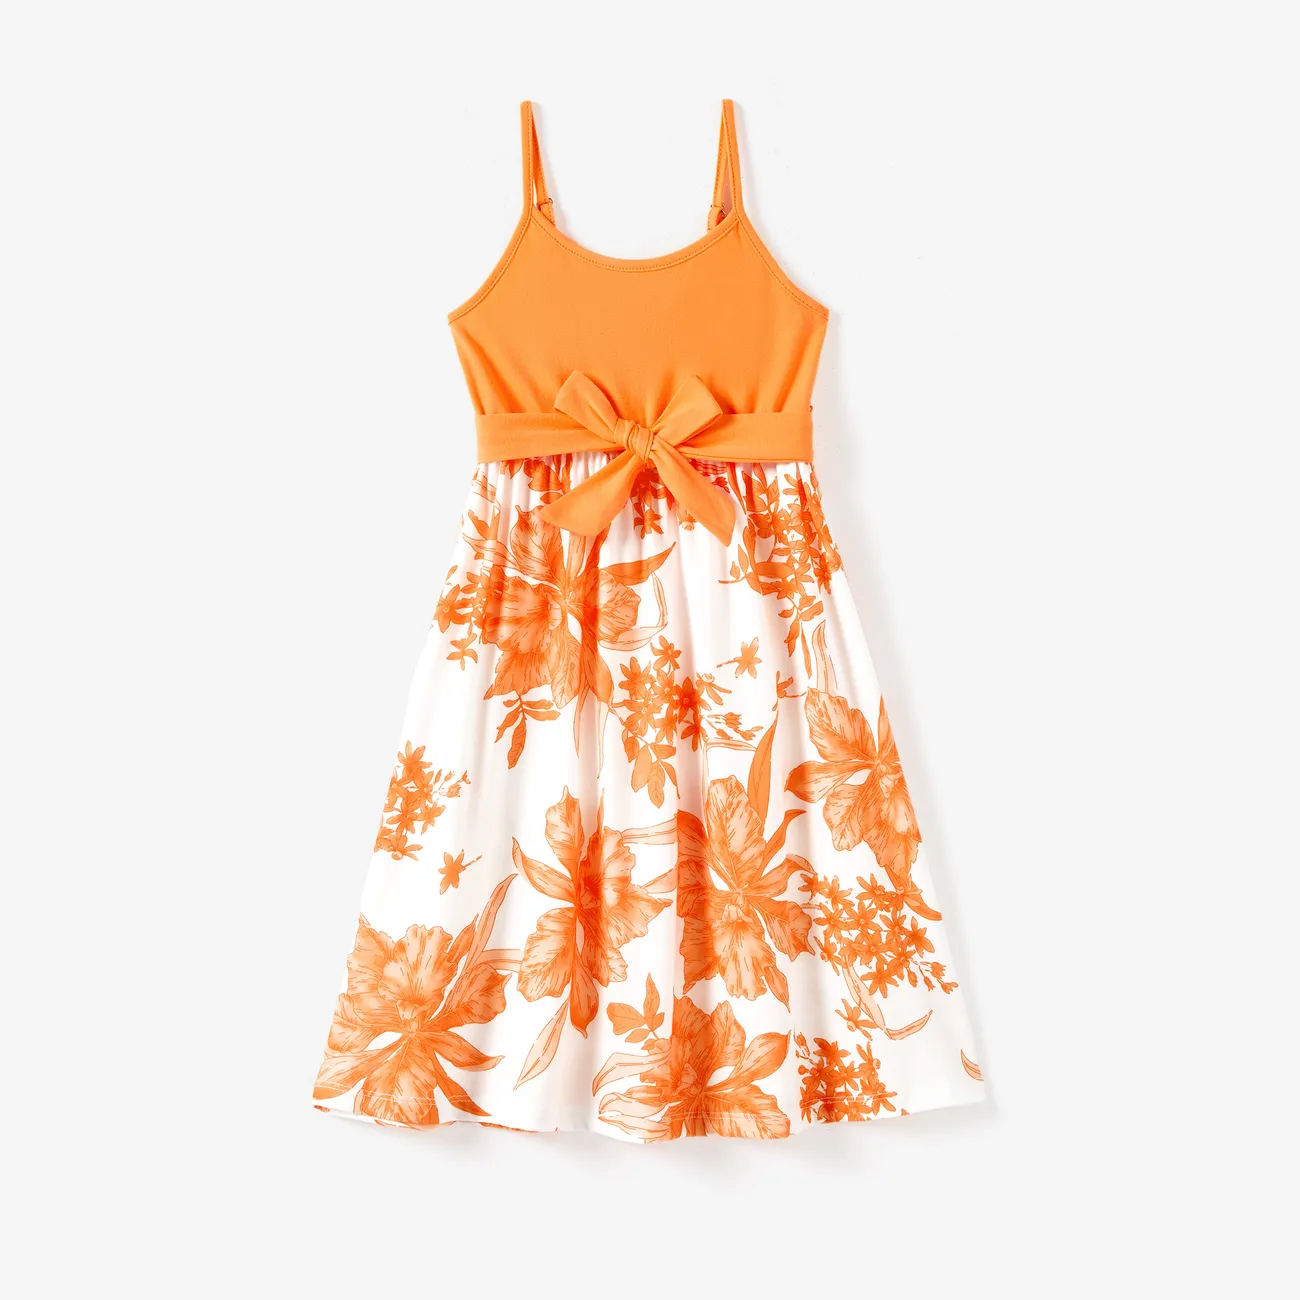 Family Matching Orange Tee and Cami Top Spliced Belted Dress Sets Orange big image 1